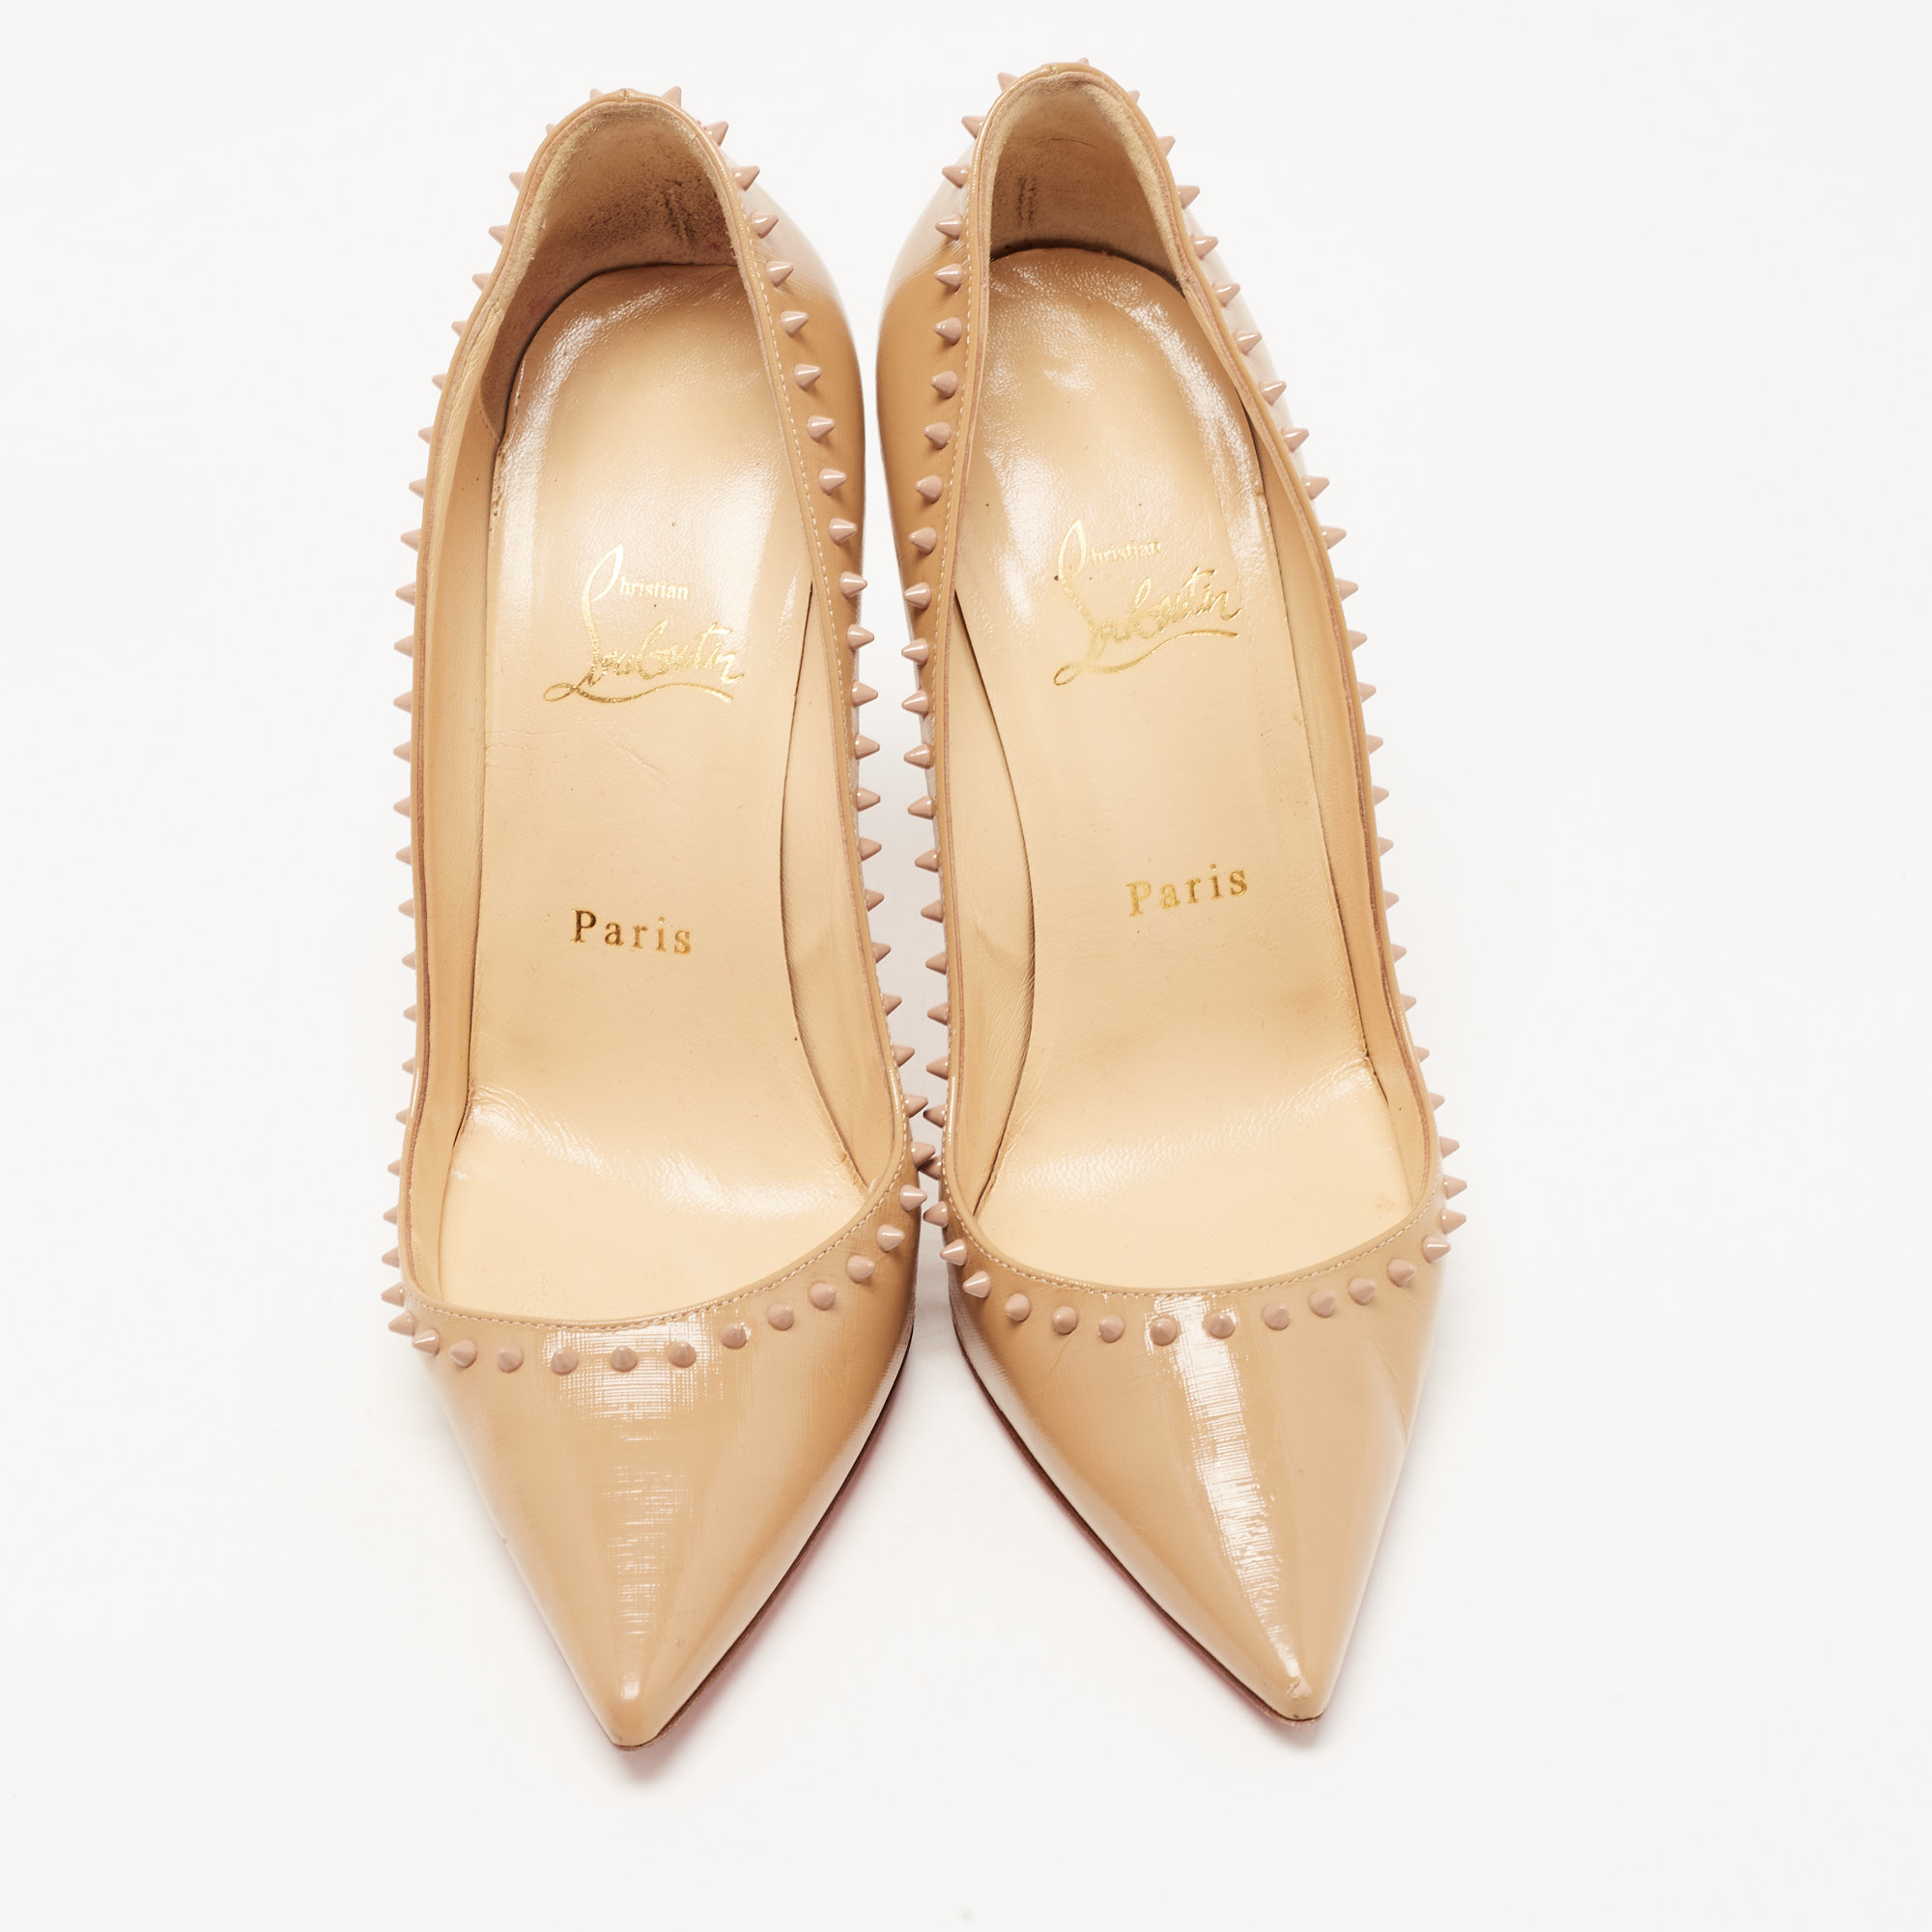 Christian Louboutin Beige Patent Leather Anjalina Spike Pointed Toe Pumps Size 38.5